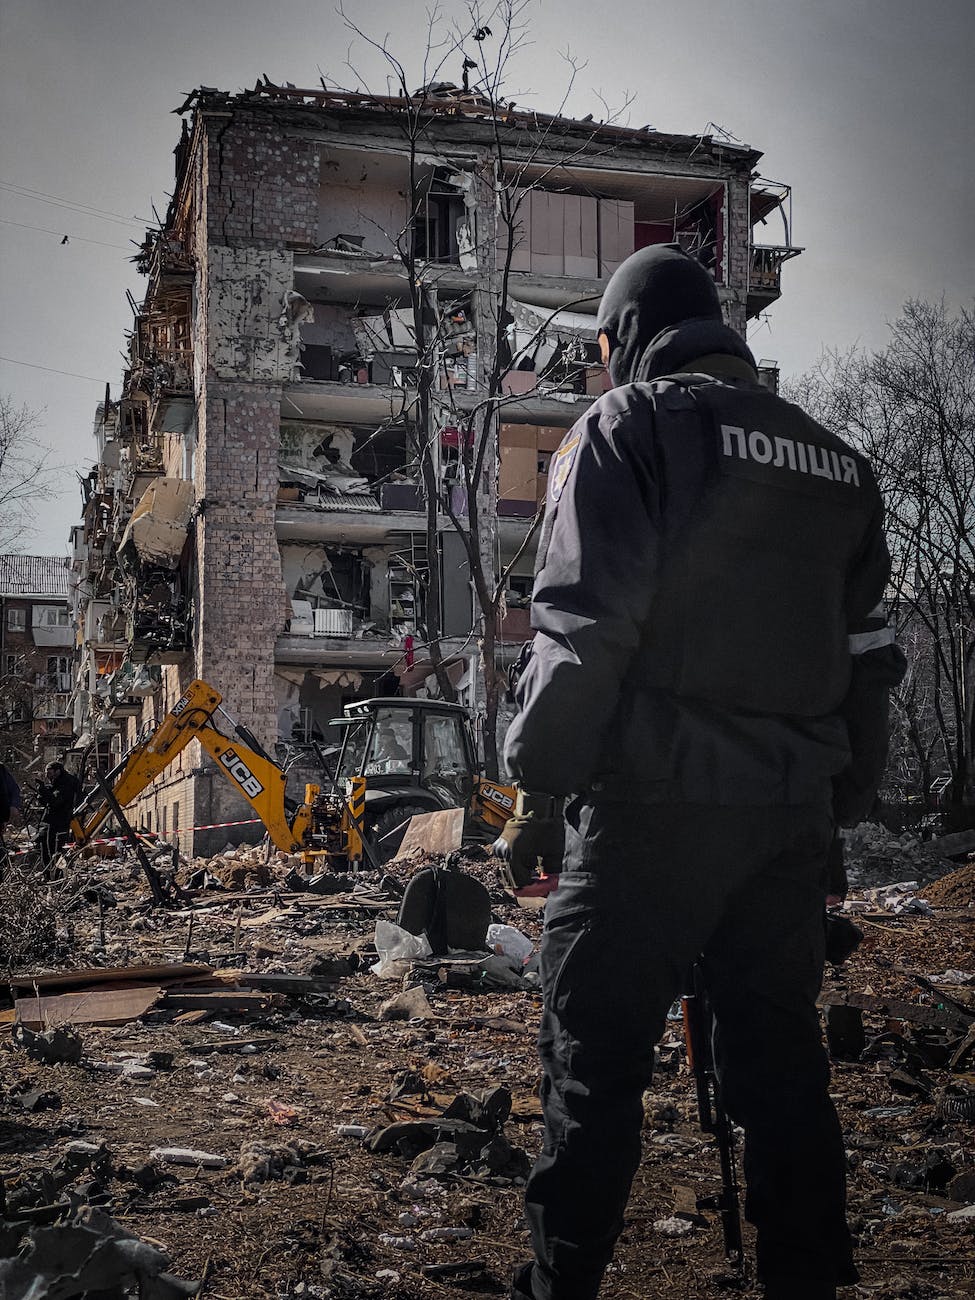 People have discovered Ukraine - policeman beside destruction of a residential building in kyiv